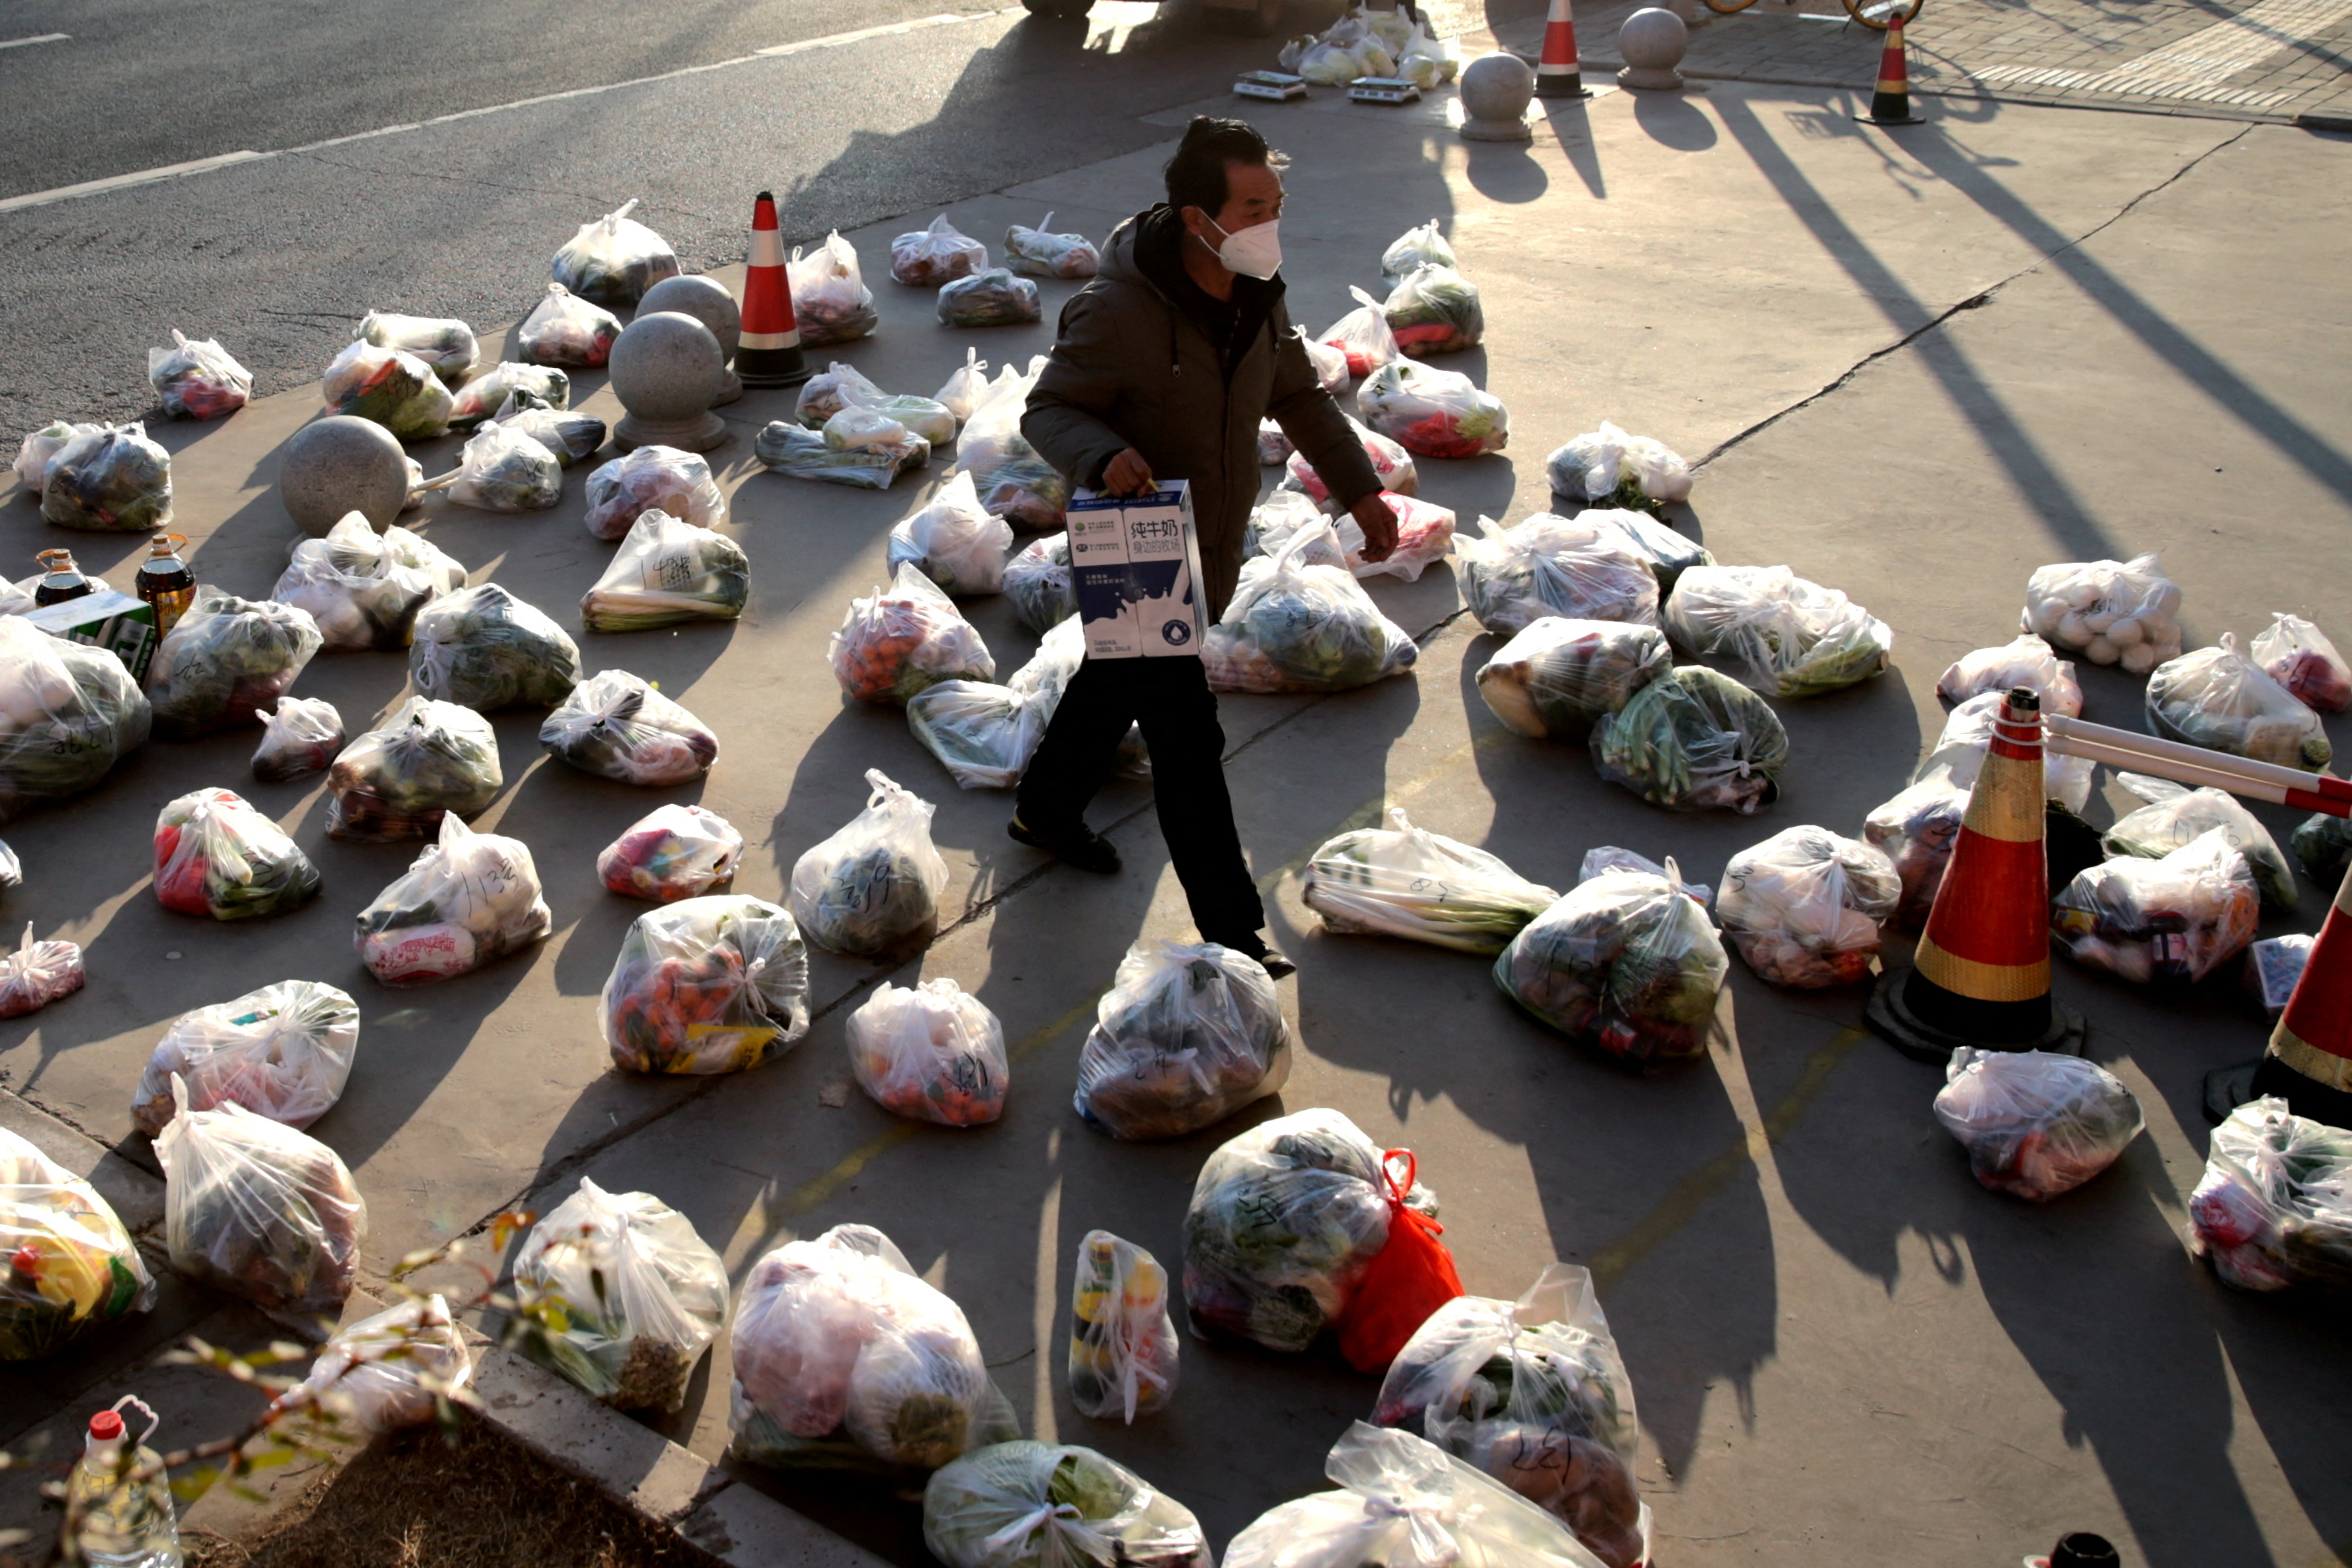 Worker prepares food supplies to be delivered to residents of a residential compound under lockdown in Xian